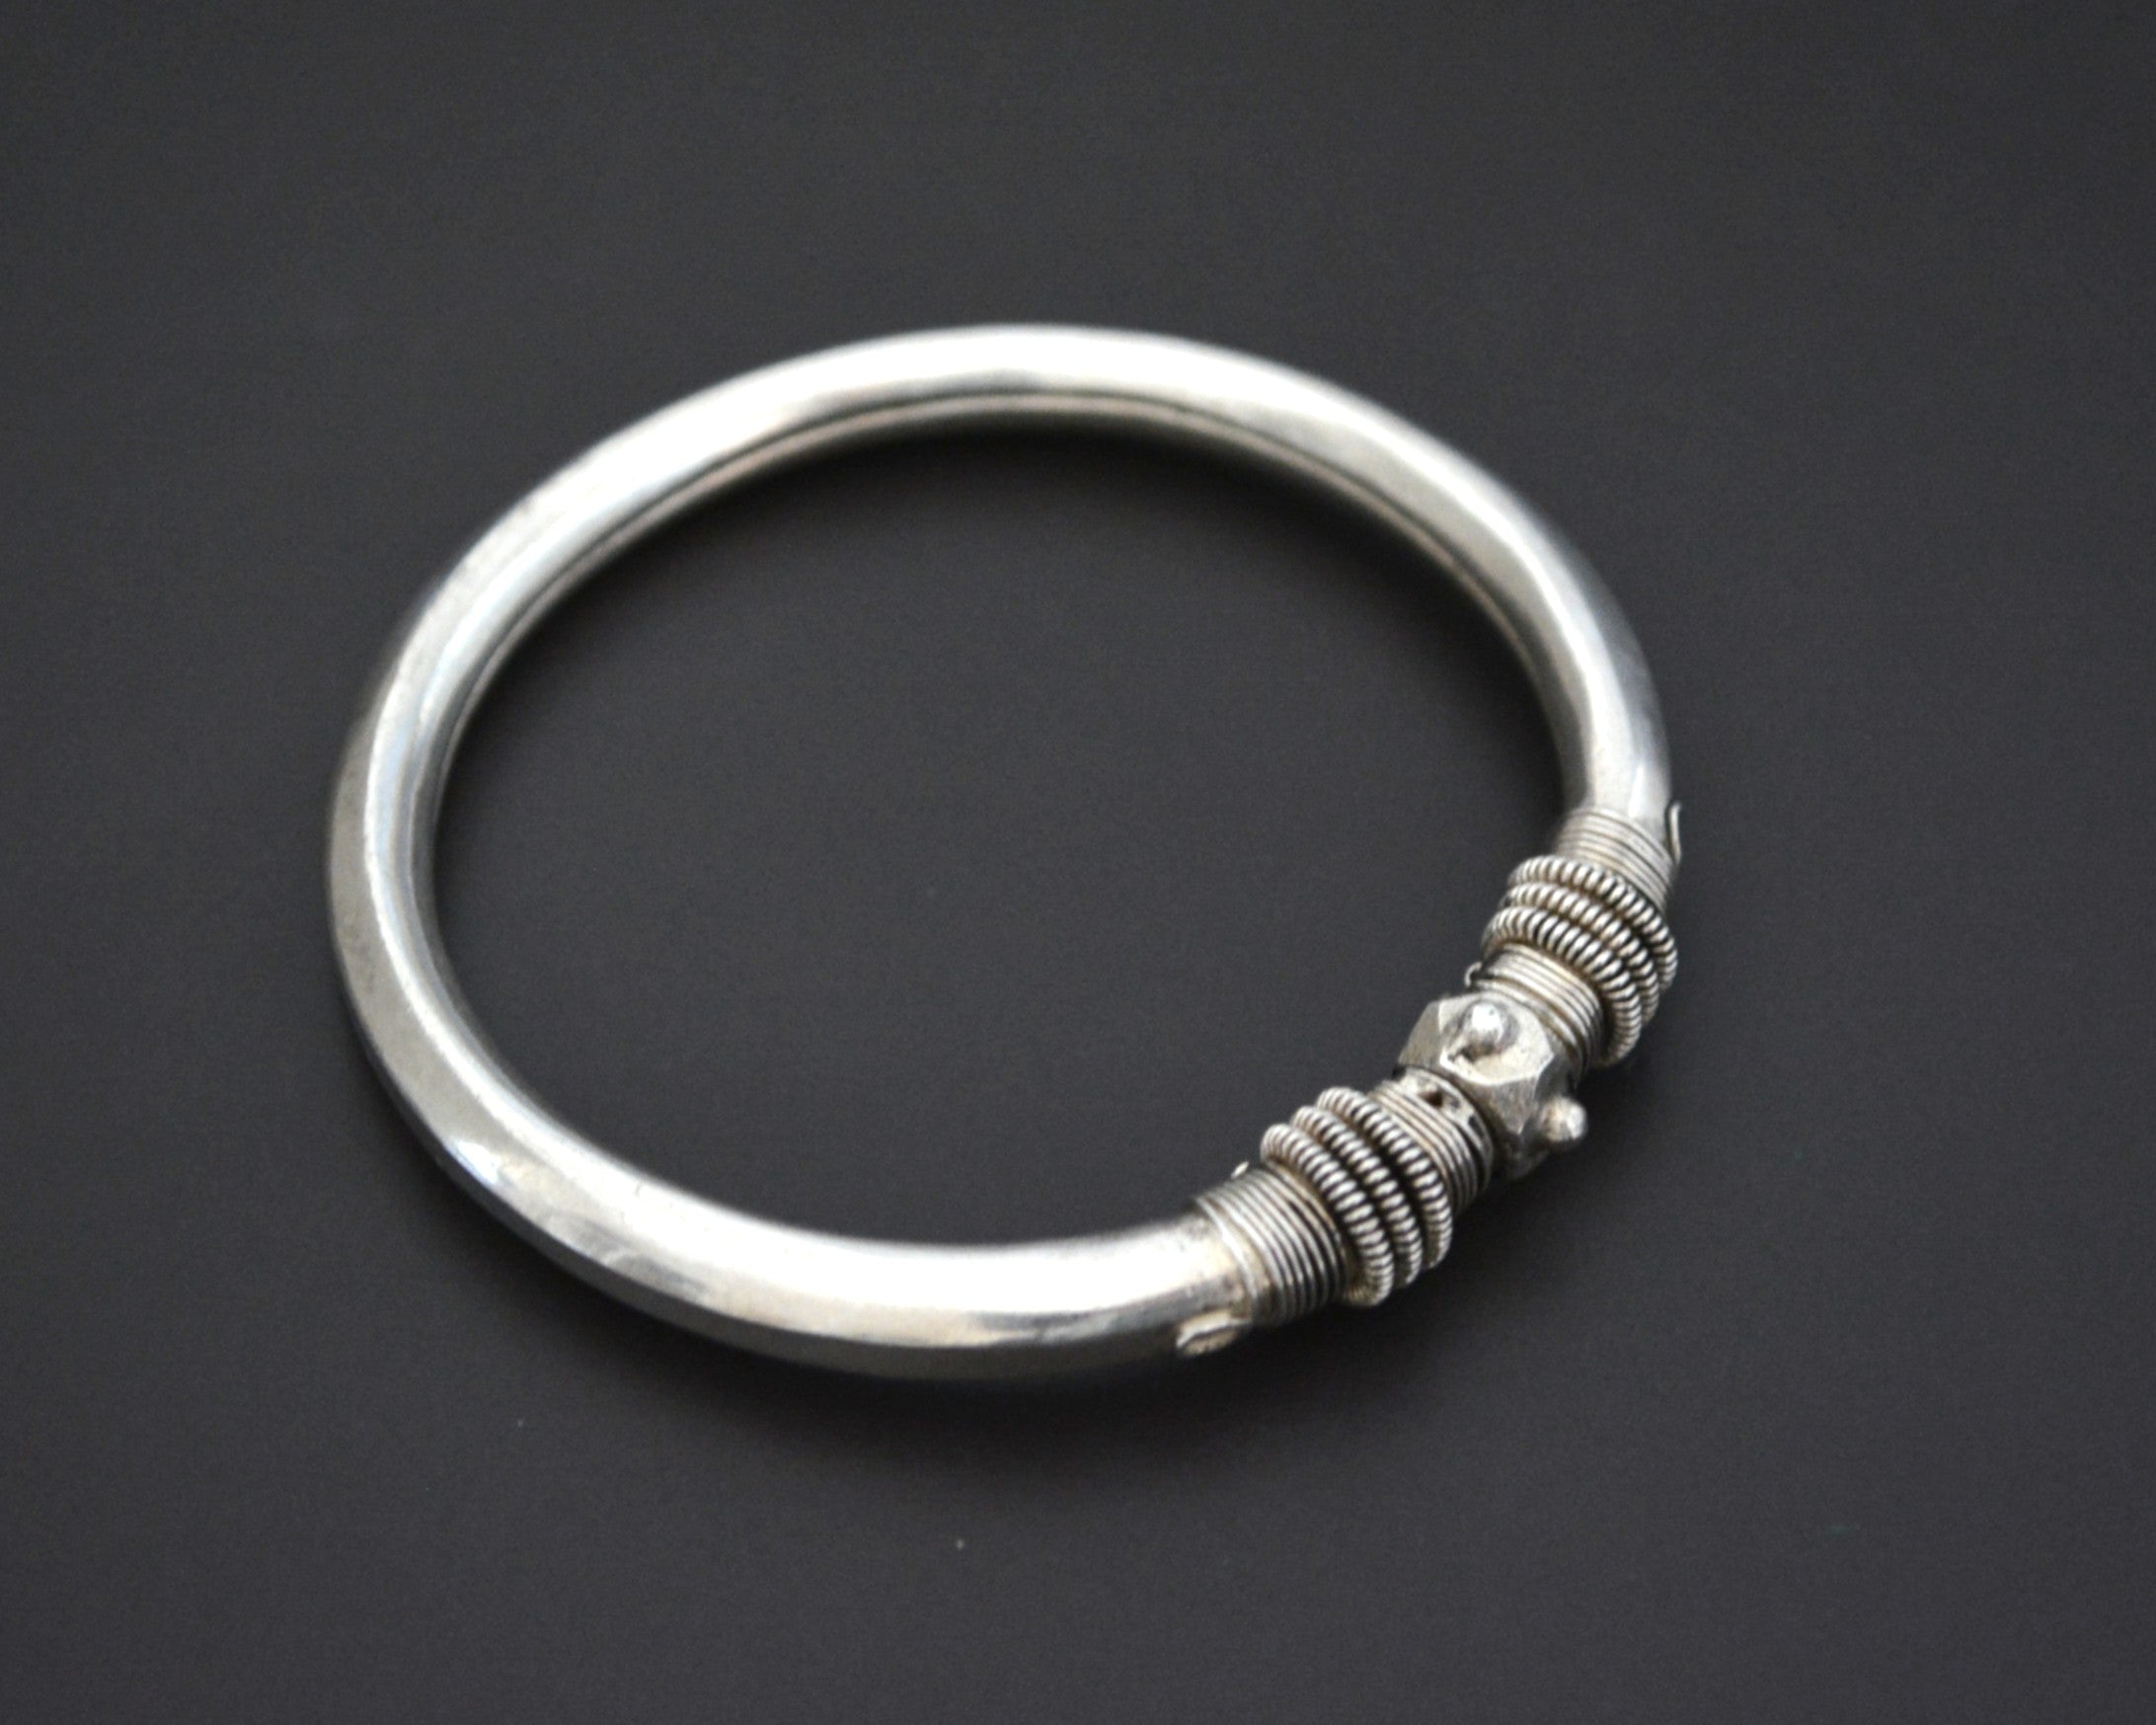 Ethnic Indian Silver Bracelet - Openable